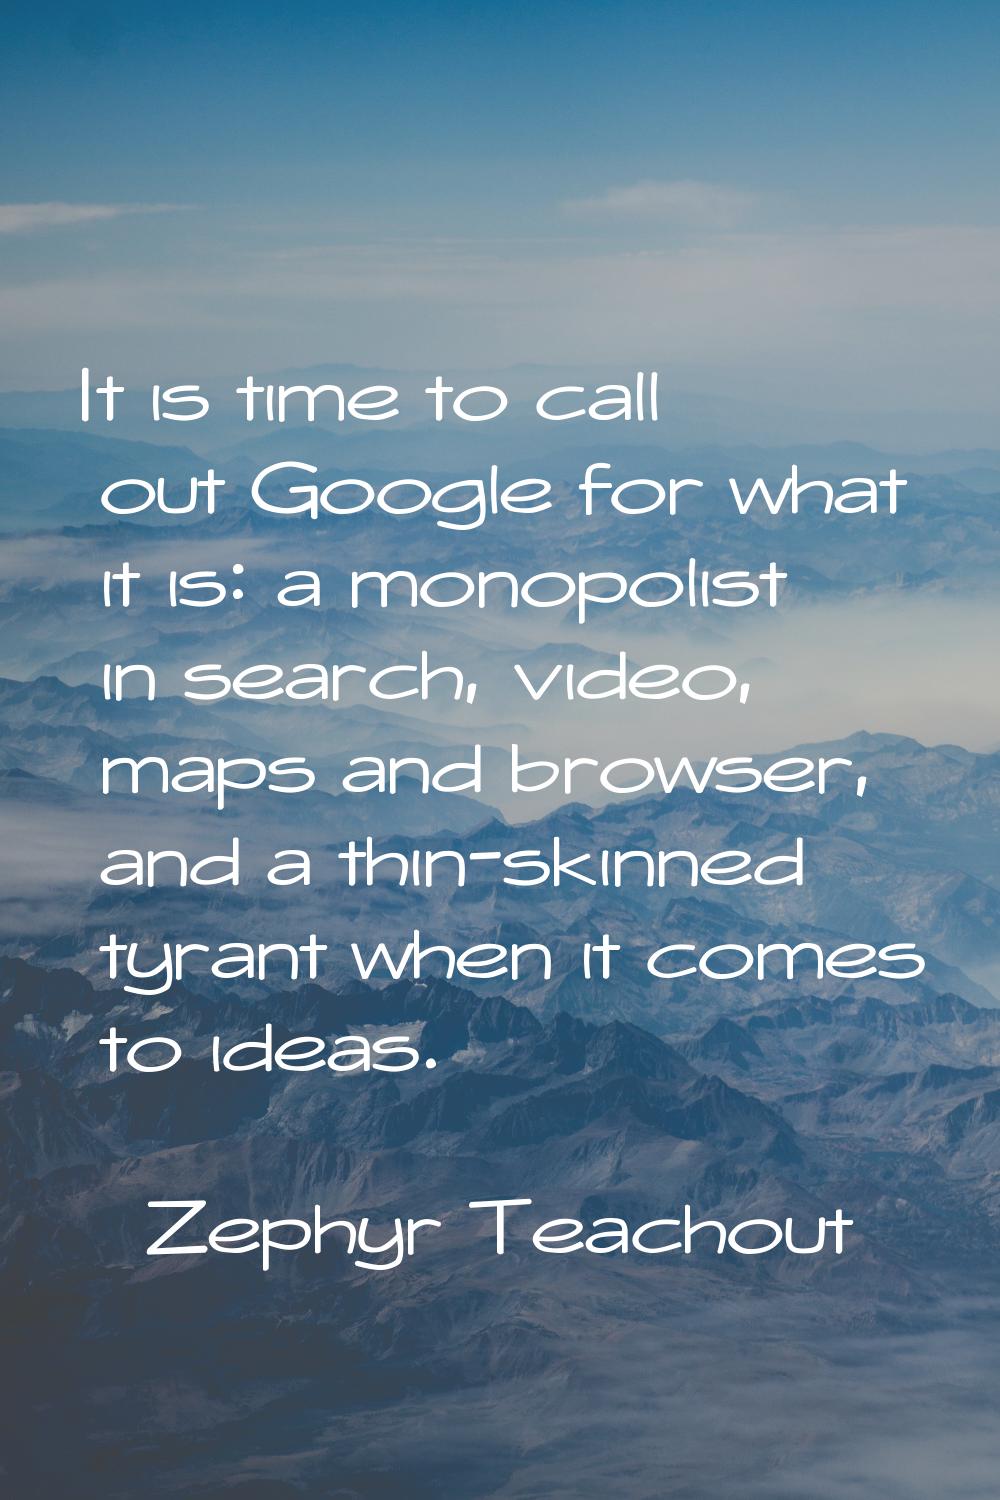 It is time to call out Google for what it is: a monopolist in search, video, maps and browser, and 